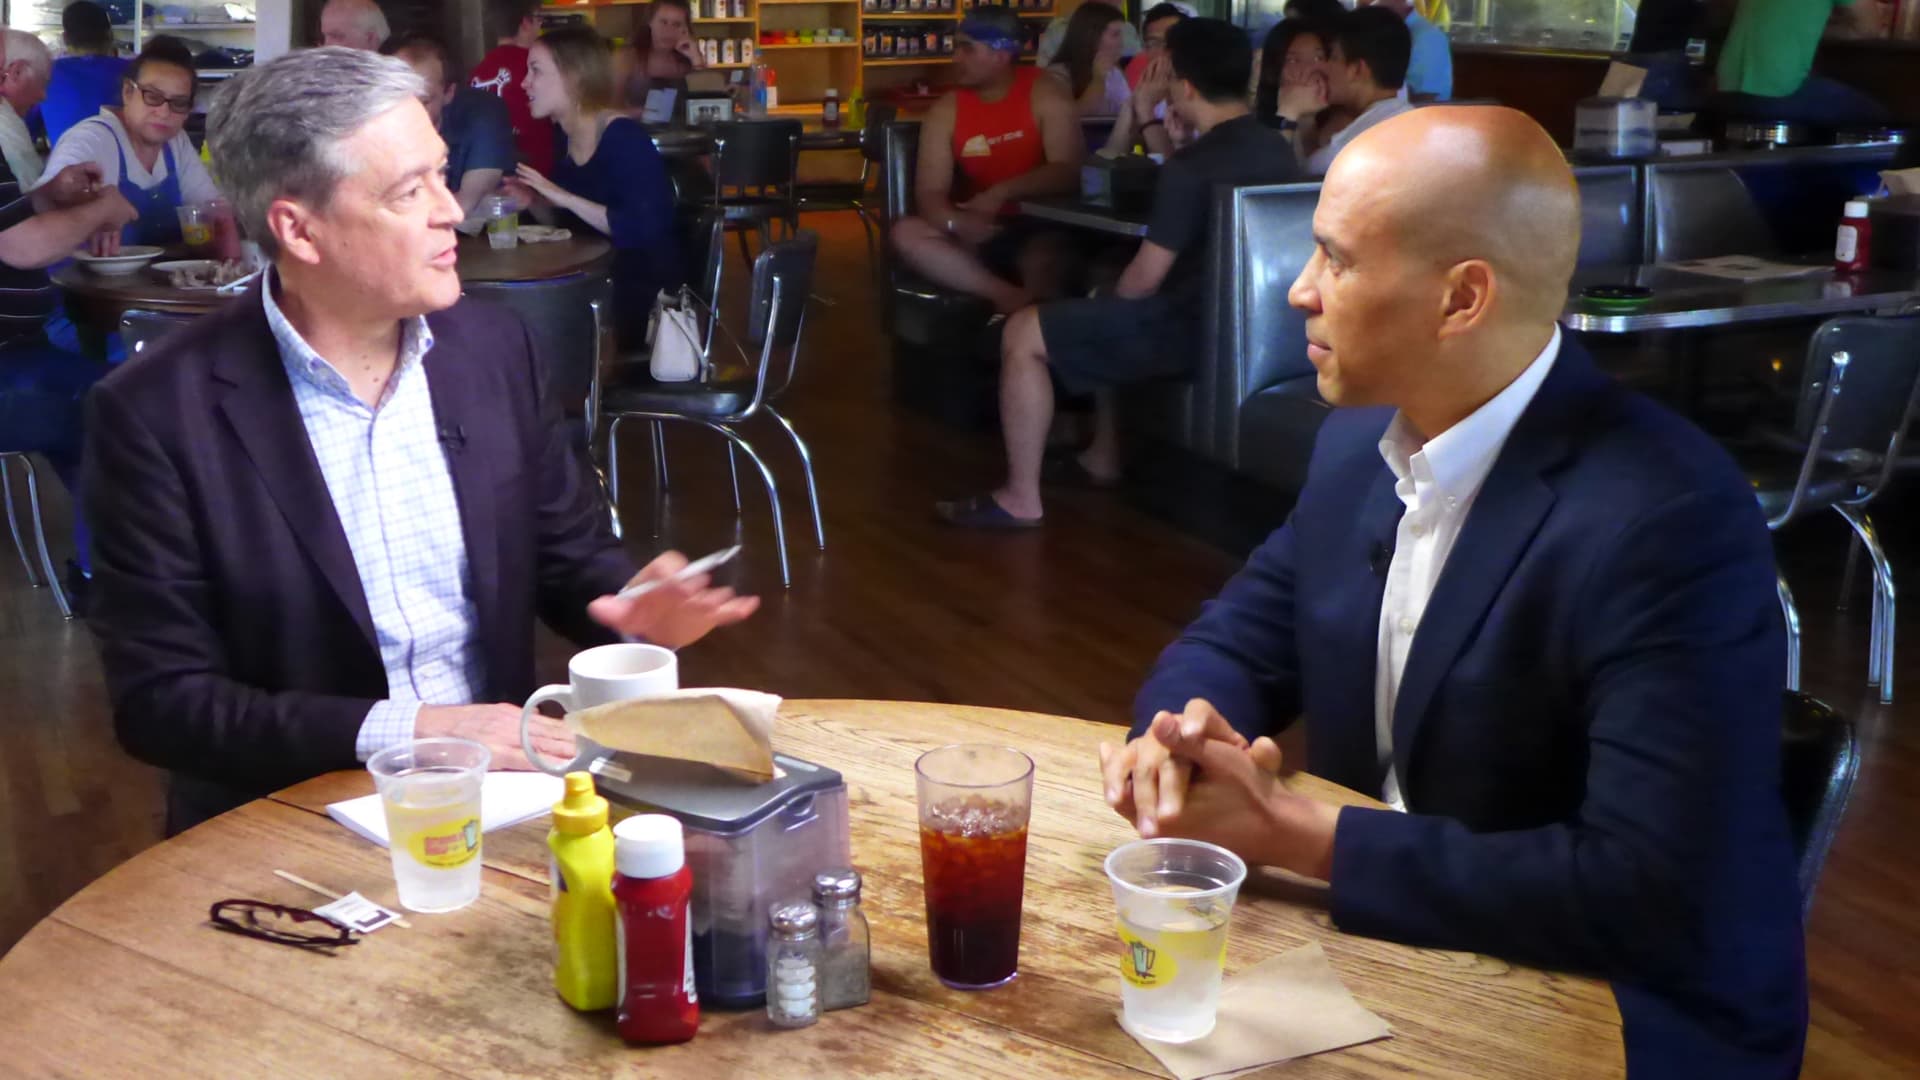 Democratic presidential candidate Cory Booker walks the line between business and the left